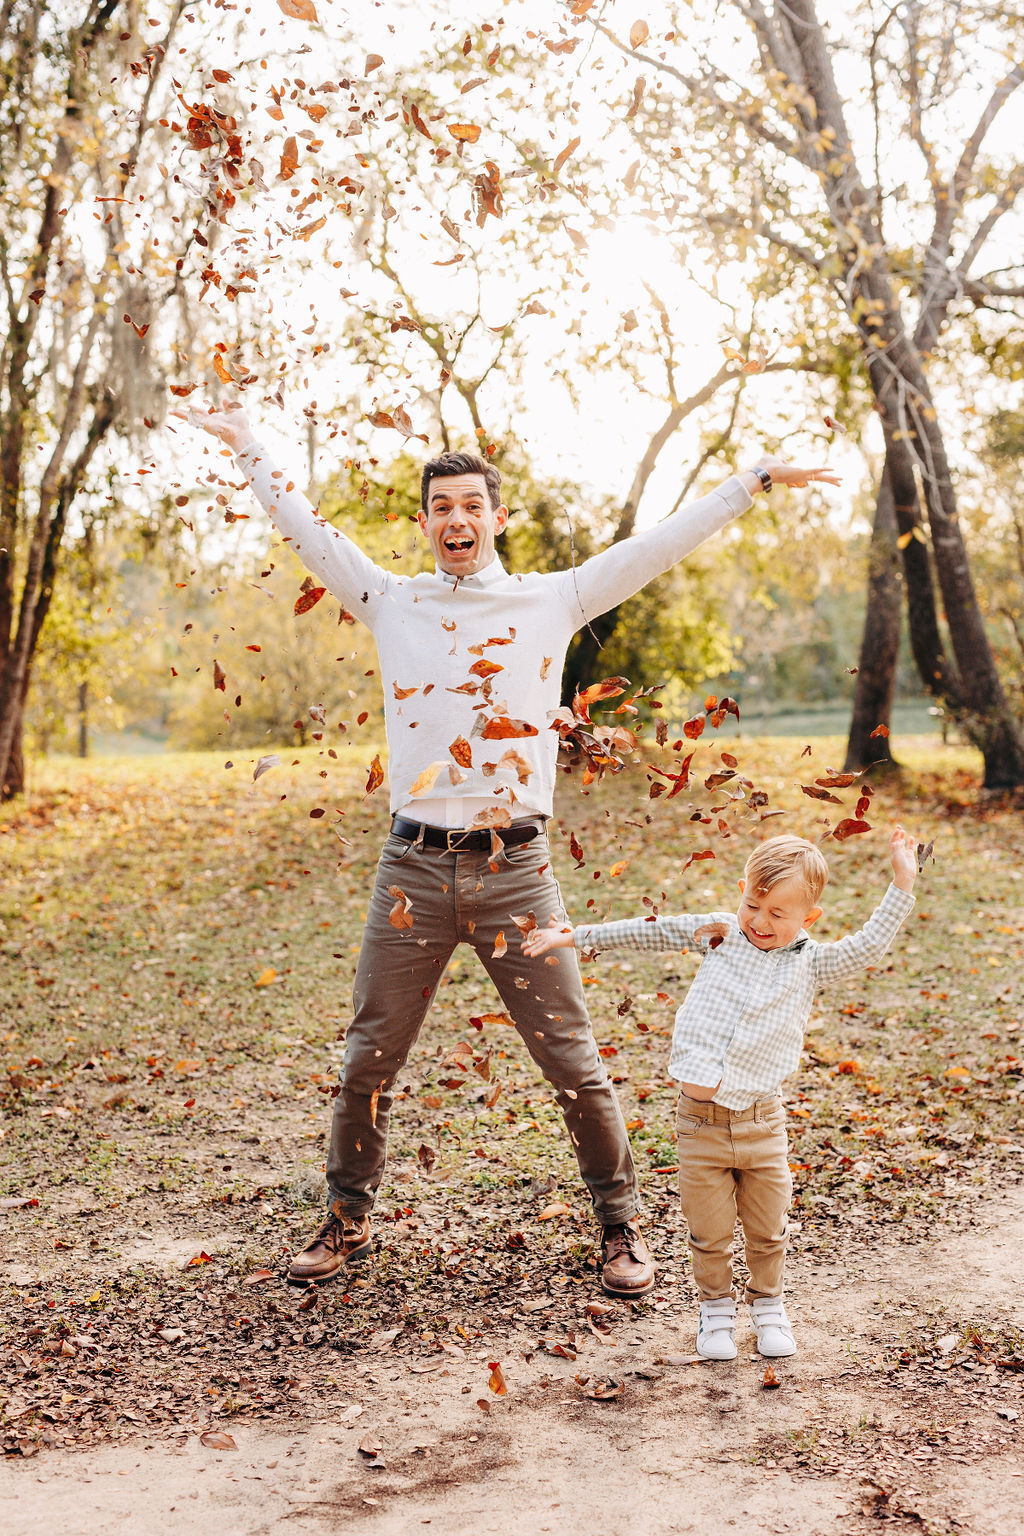 A happy dad throws leaves up in the air while playing with his toddler son in a park